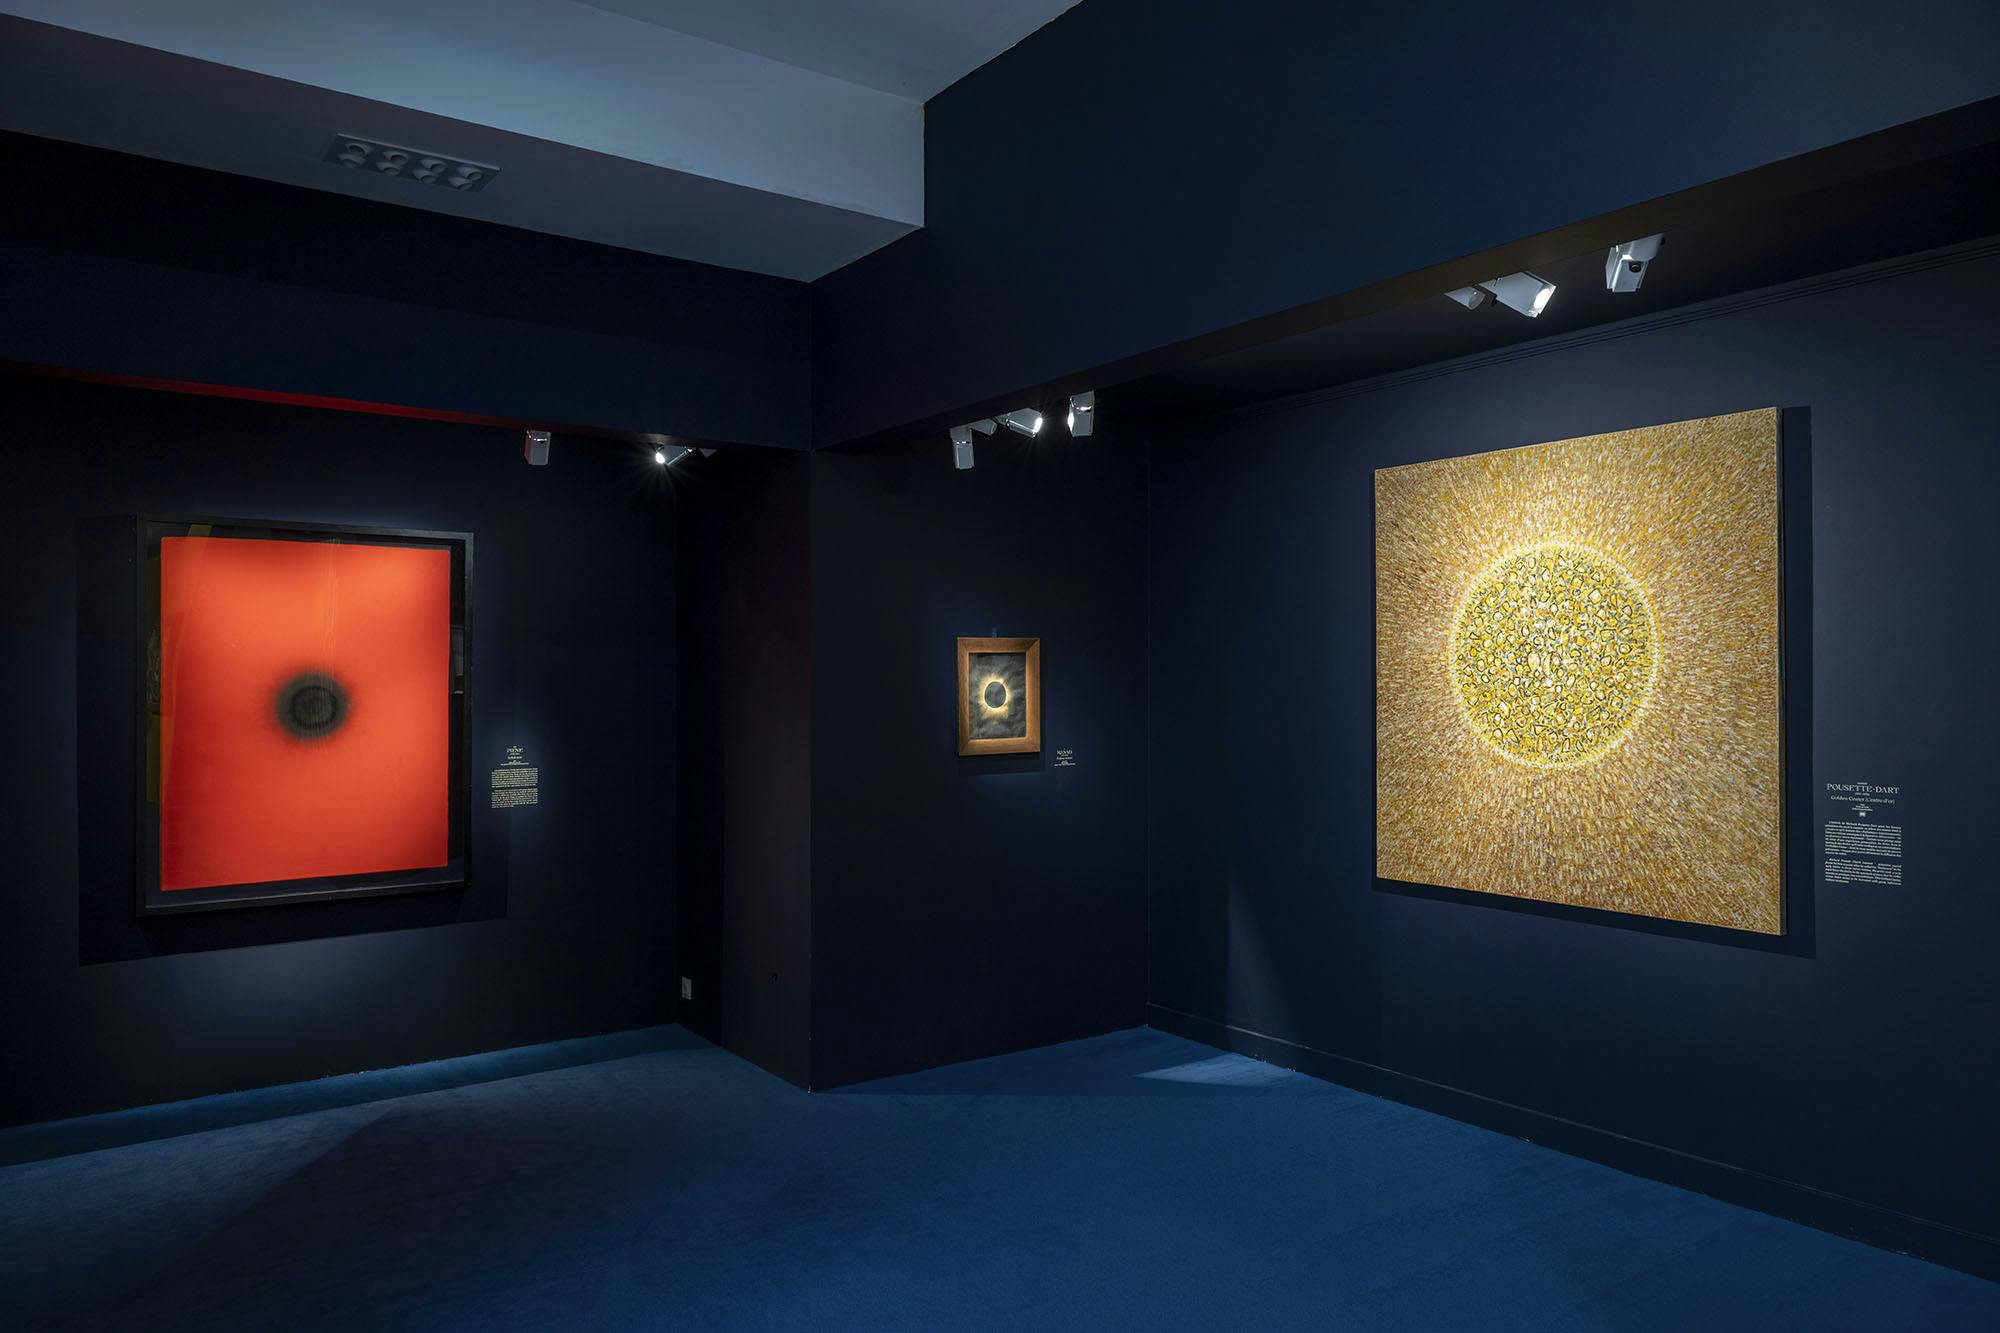 Installation view, Facing the Sun: The Celestial Body in the Arts, Museum Barberini, Potsdam, Germany, 2022. – The Richard Pousette-Dart Foundation